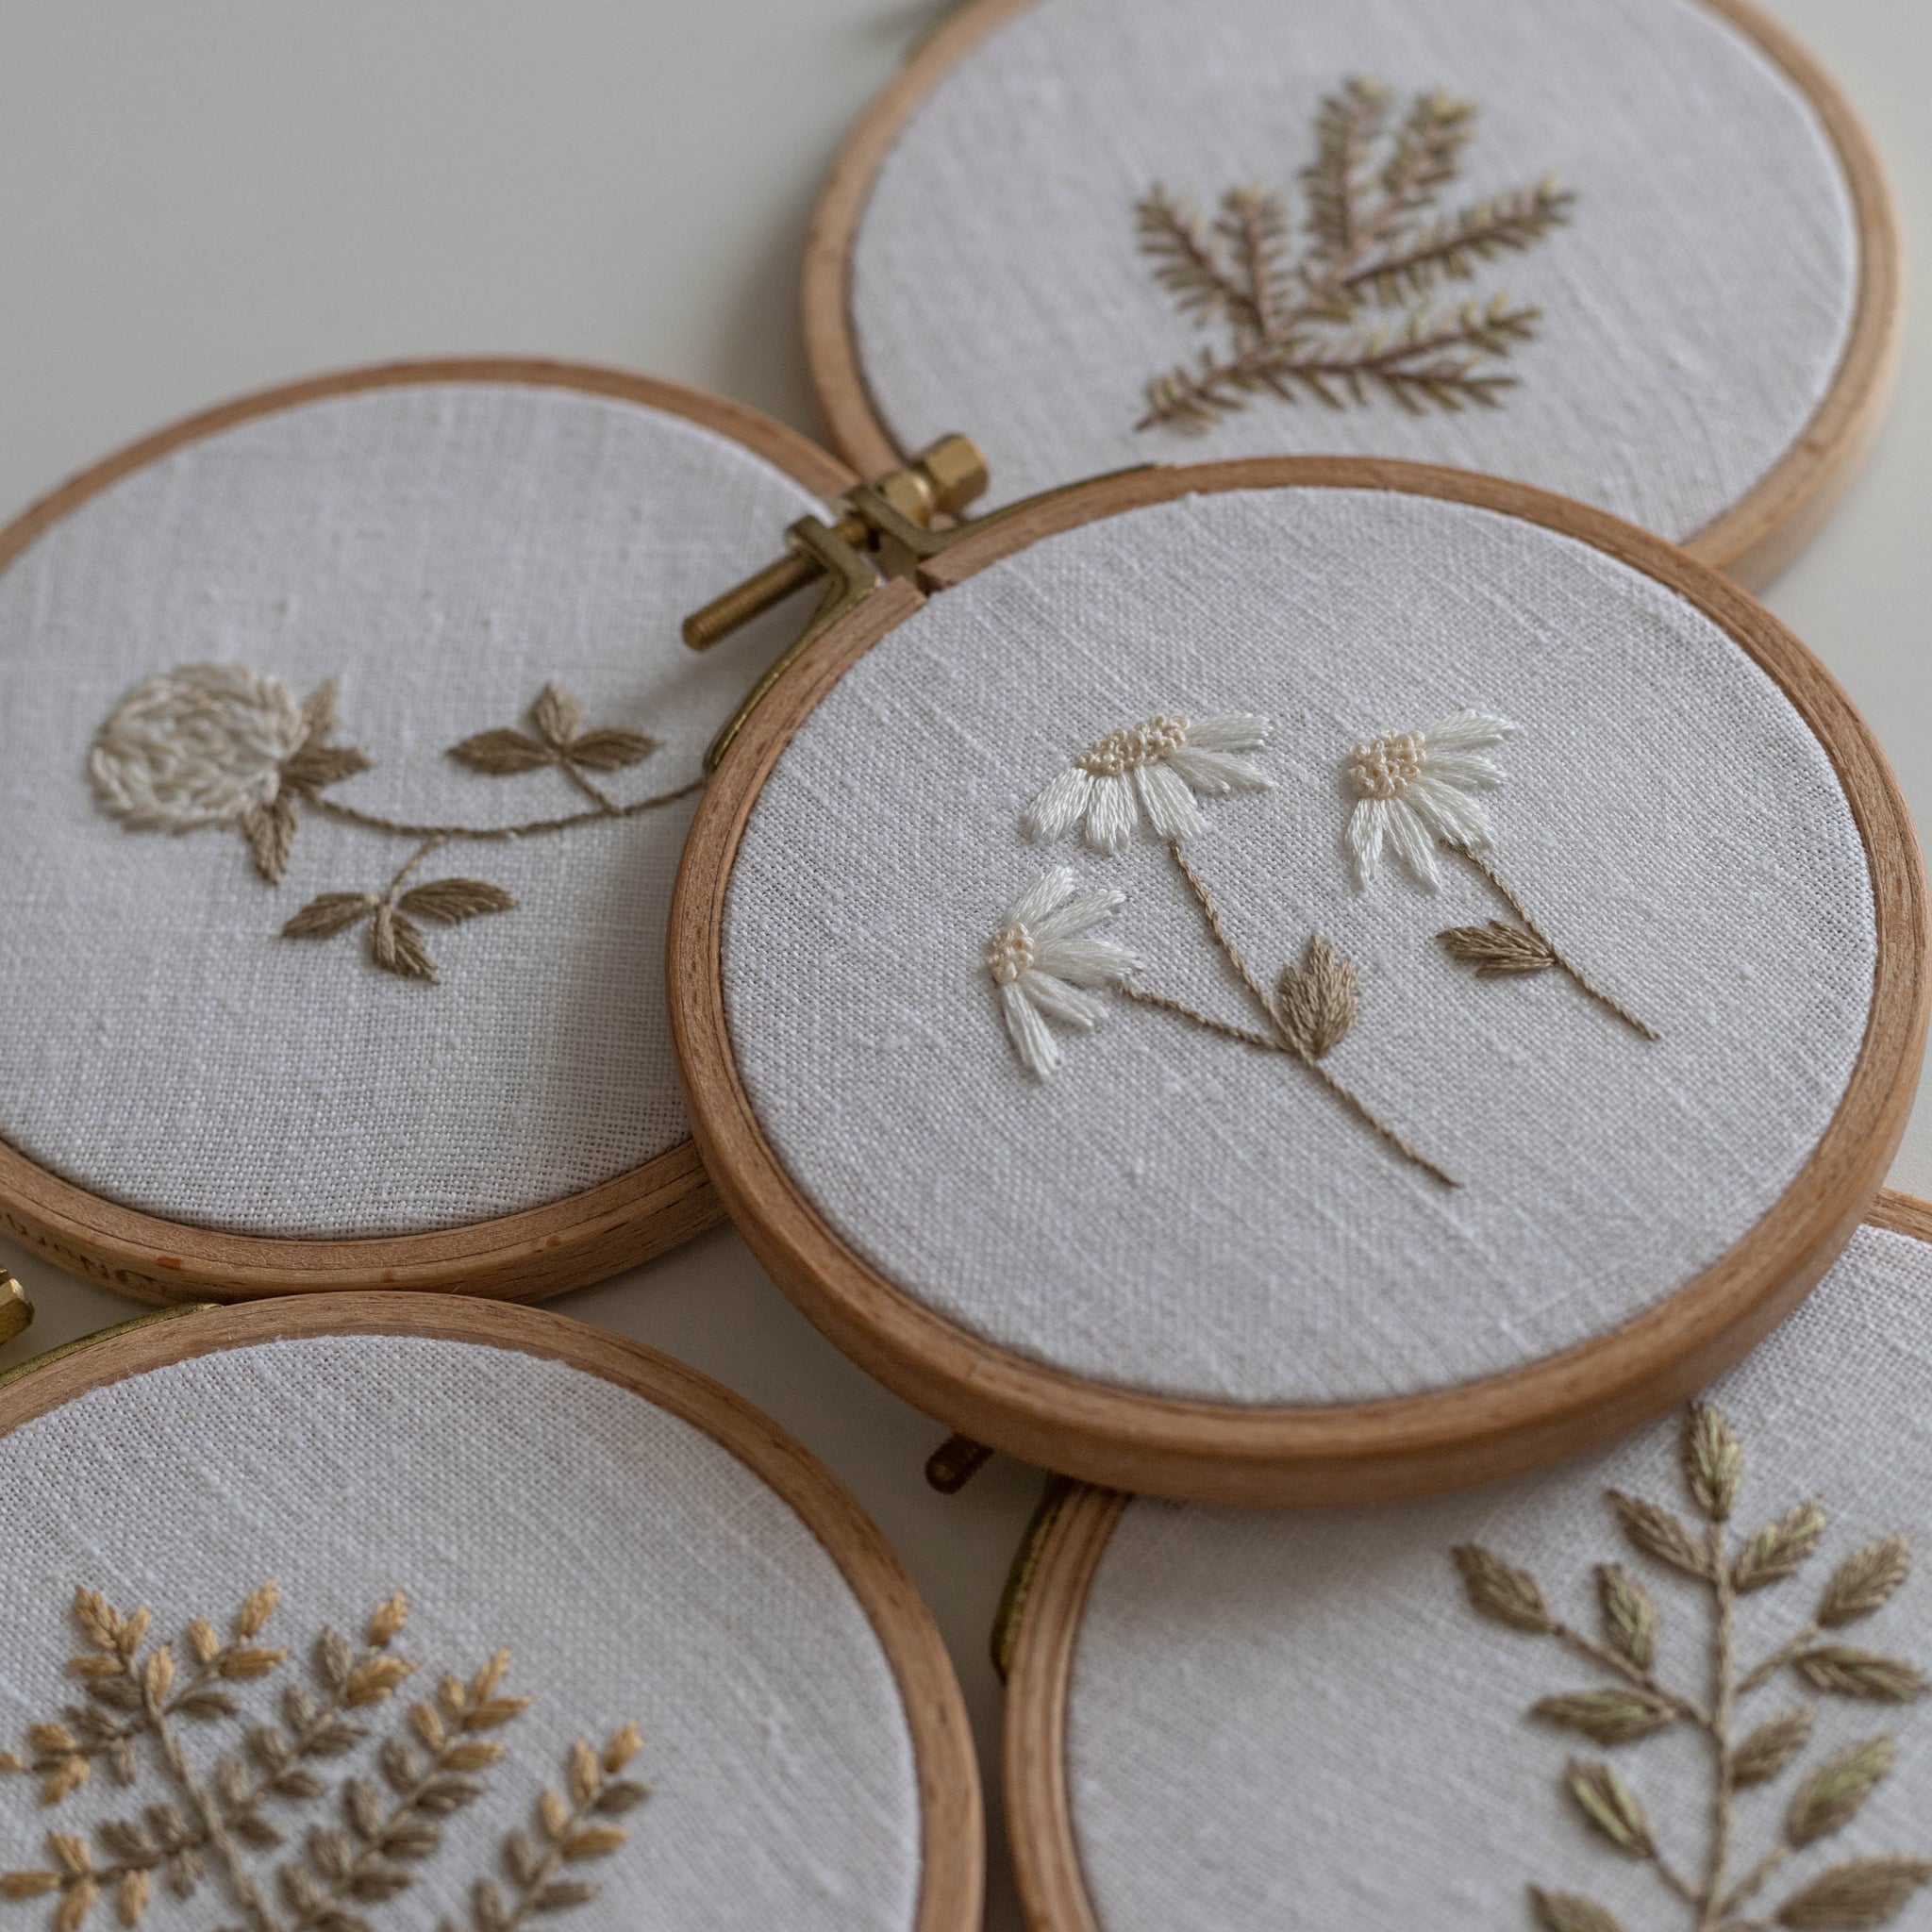 Botanical Hand Embroidery Designs Set, Wildflowers Embroidery